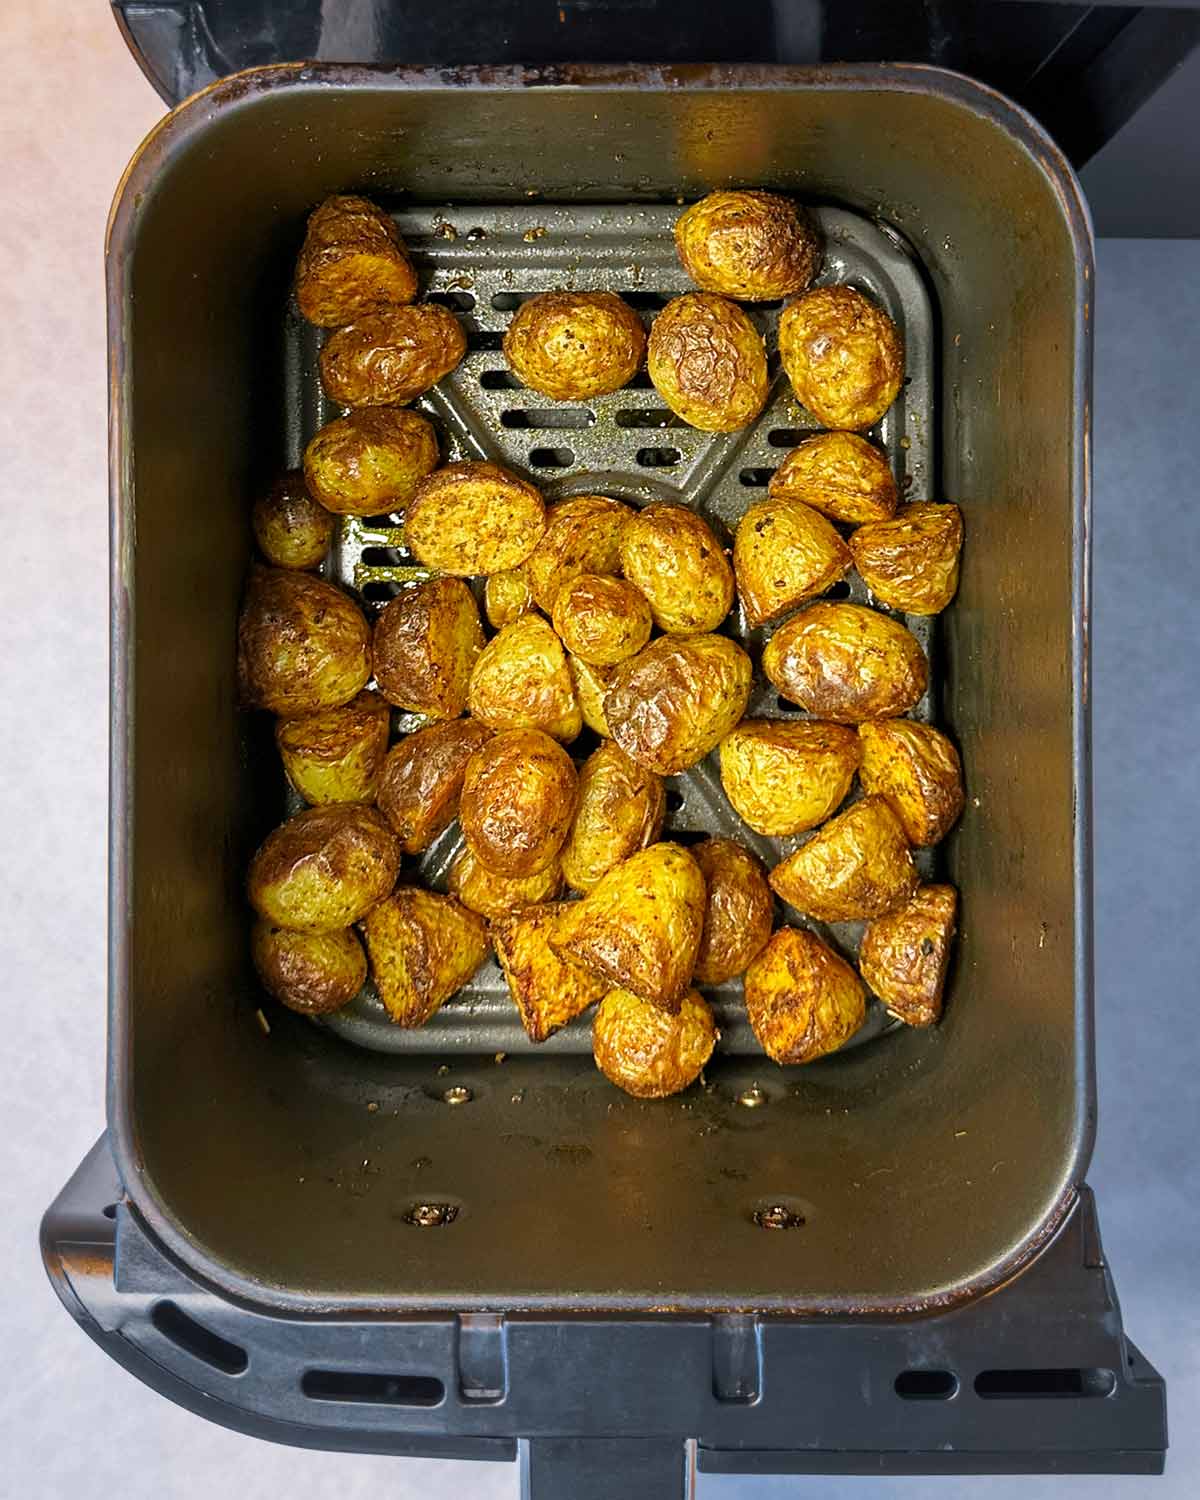 Cooked baby potatoes in an air fryer basket.